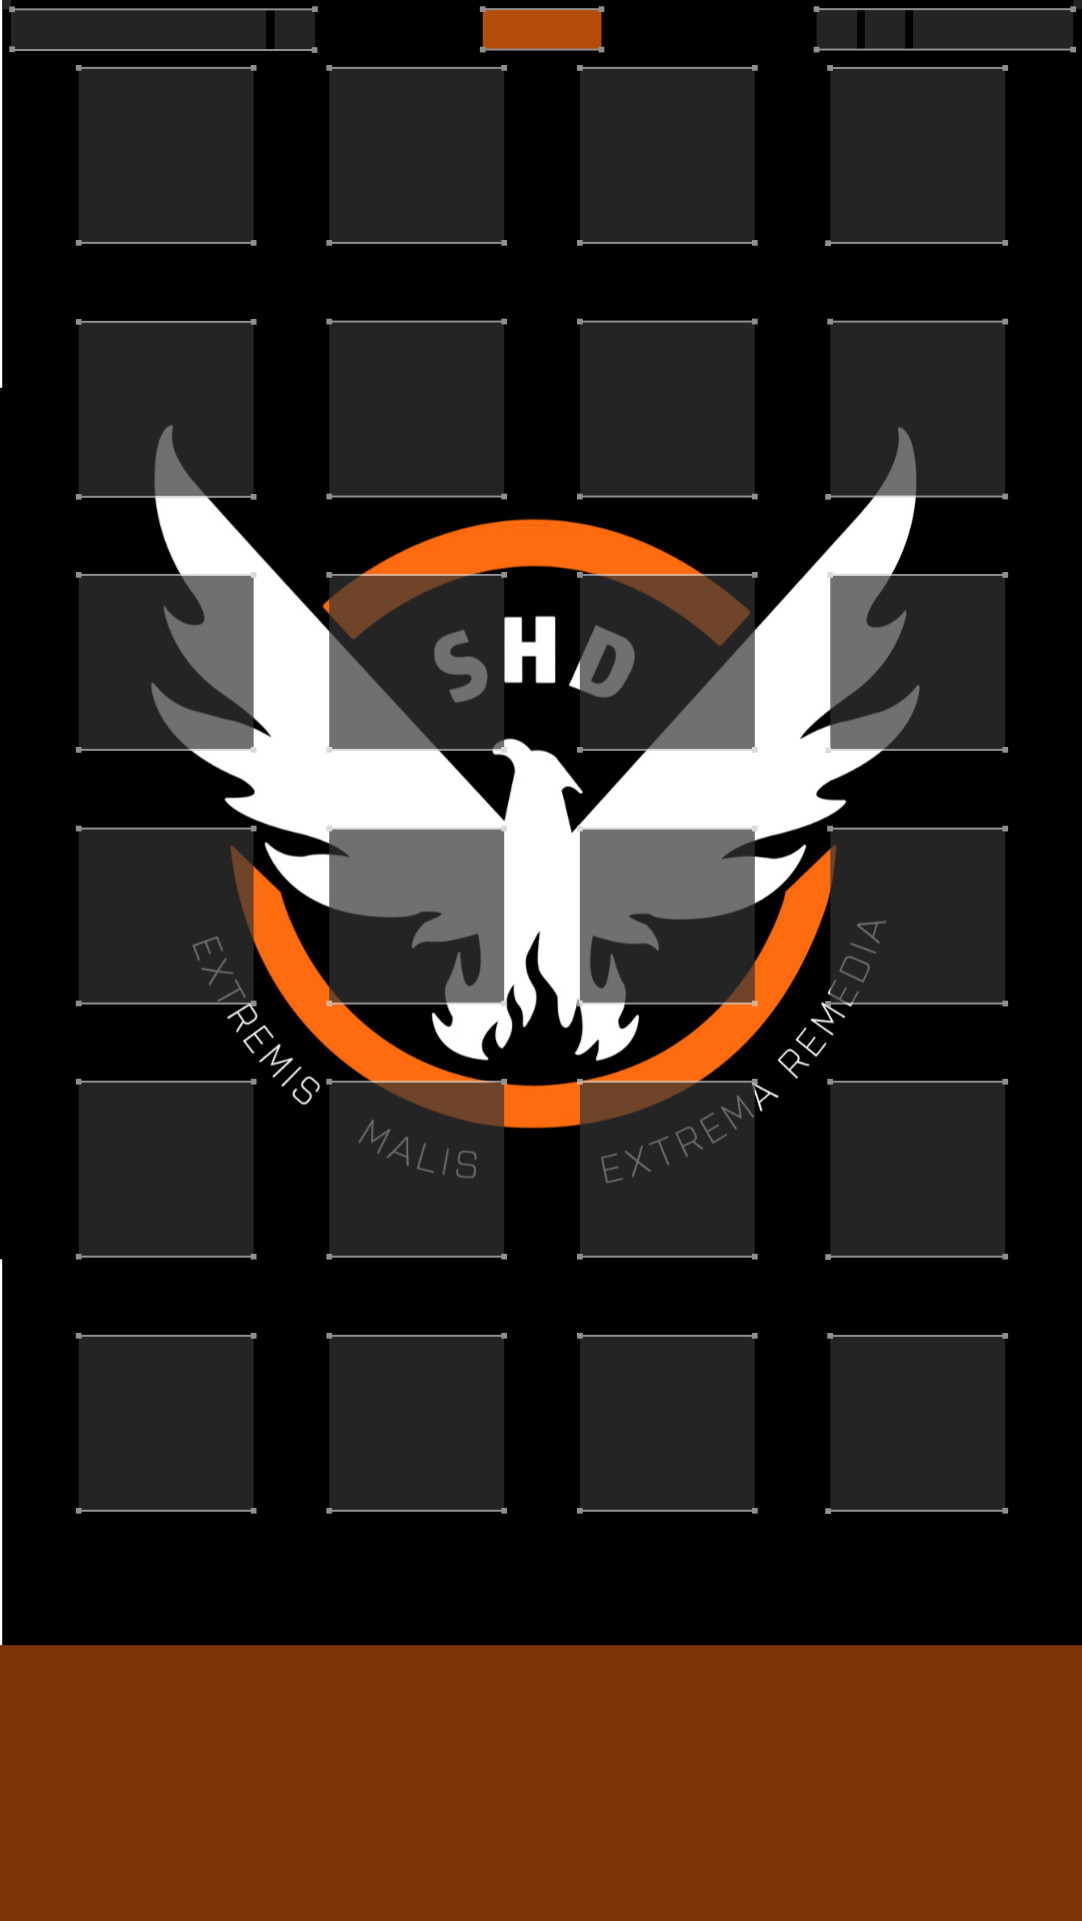 Tom Clancy's The Division 2 Wallpaper - Division Shd Wallpaper Phone , HD Wallpaper & Backgrounds